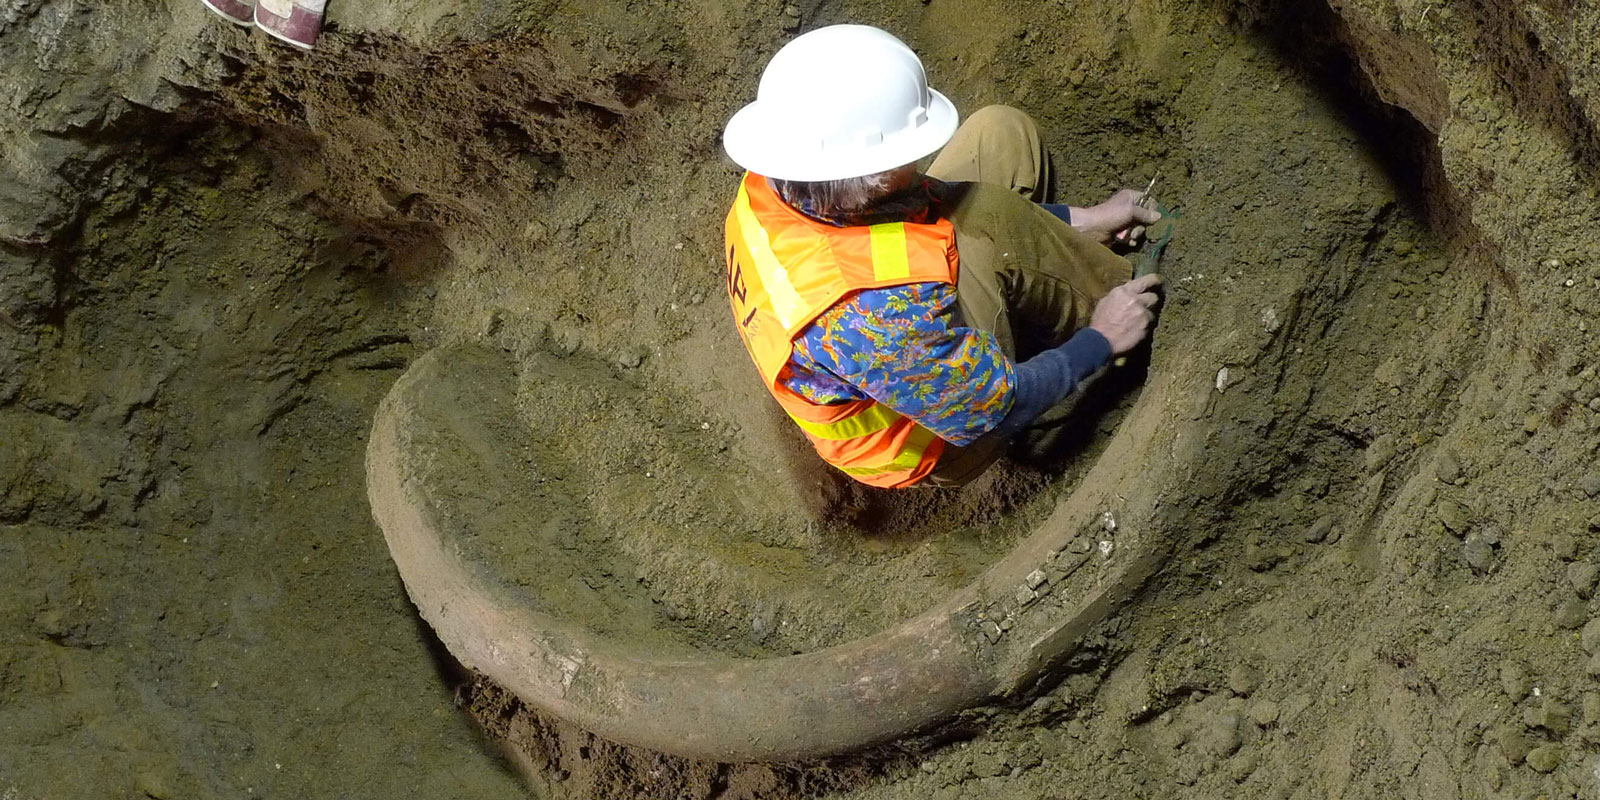 A male construction worker excavates a mammoth tusk from the ground